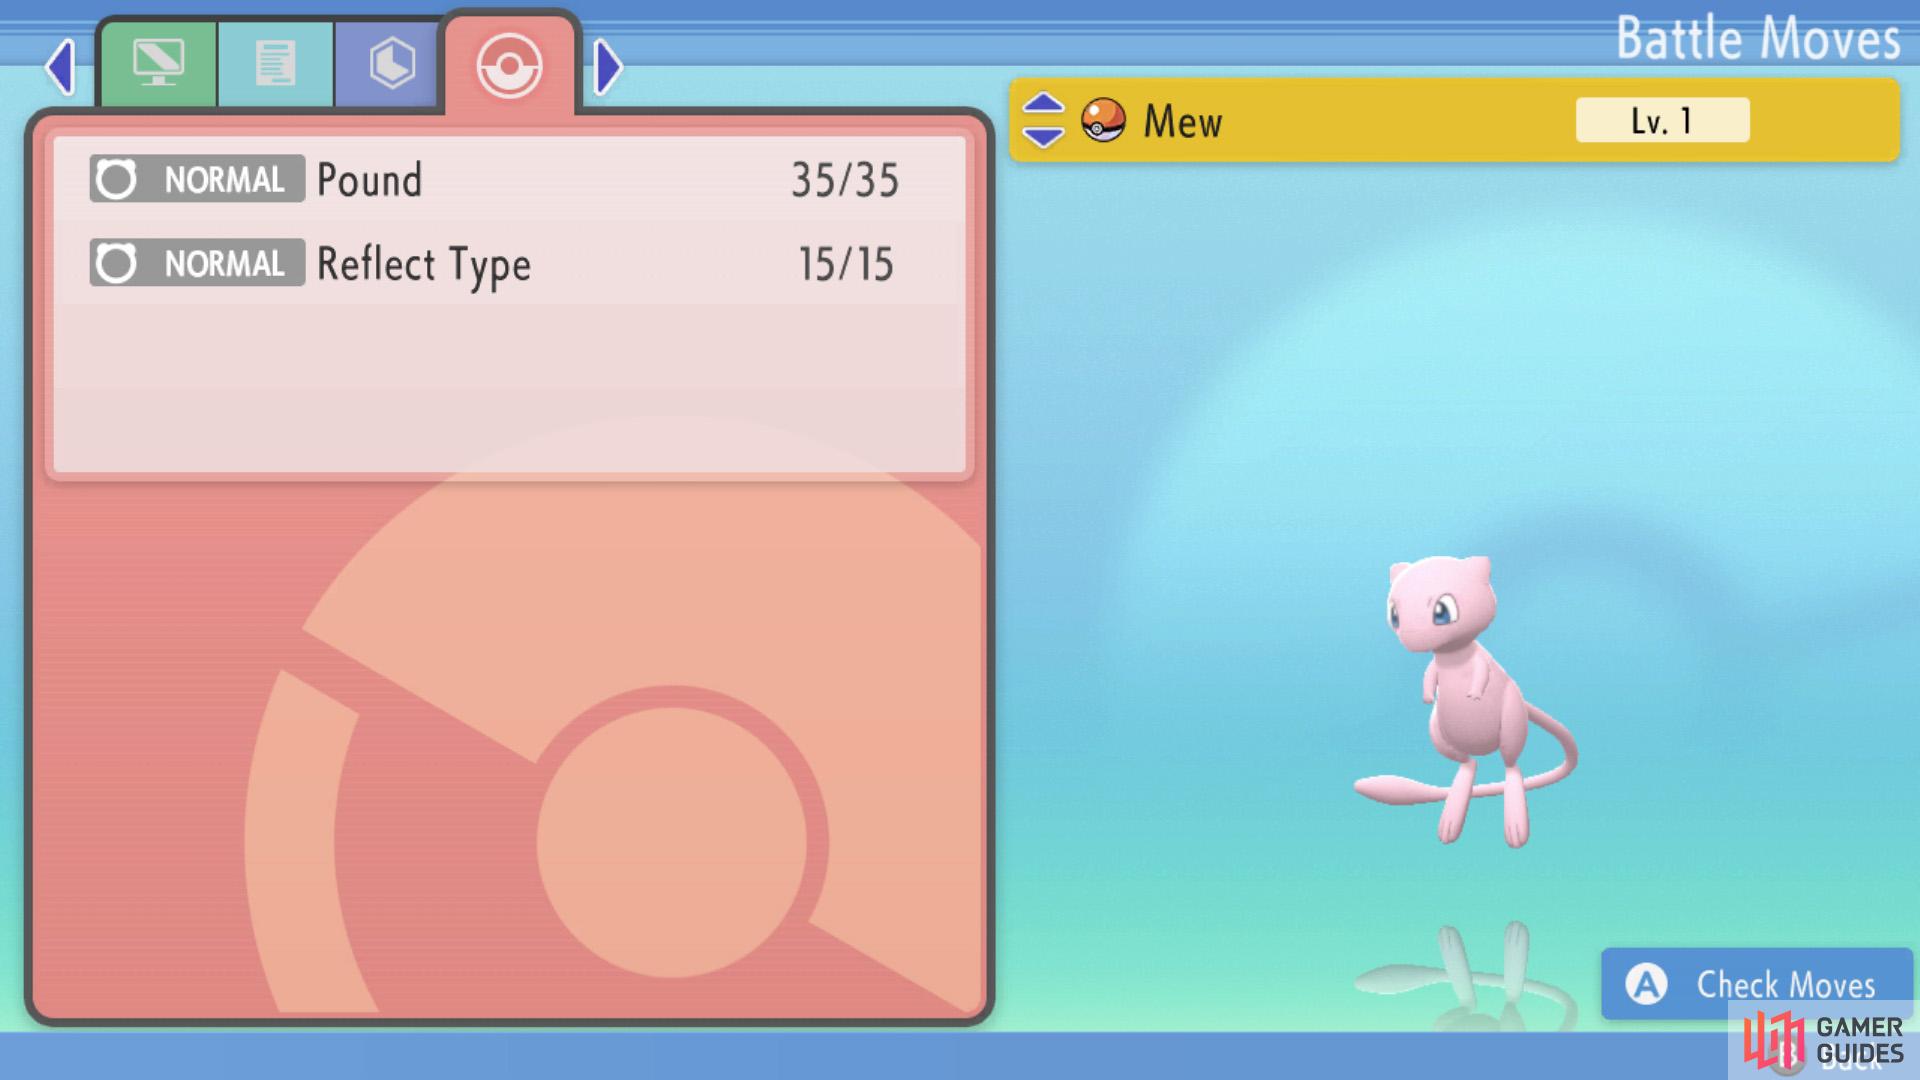 Mew when you first obtain it.